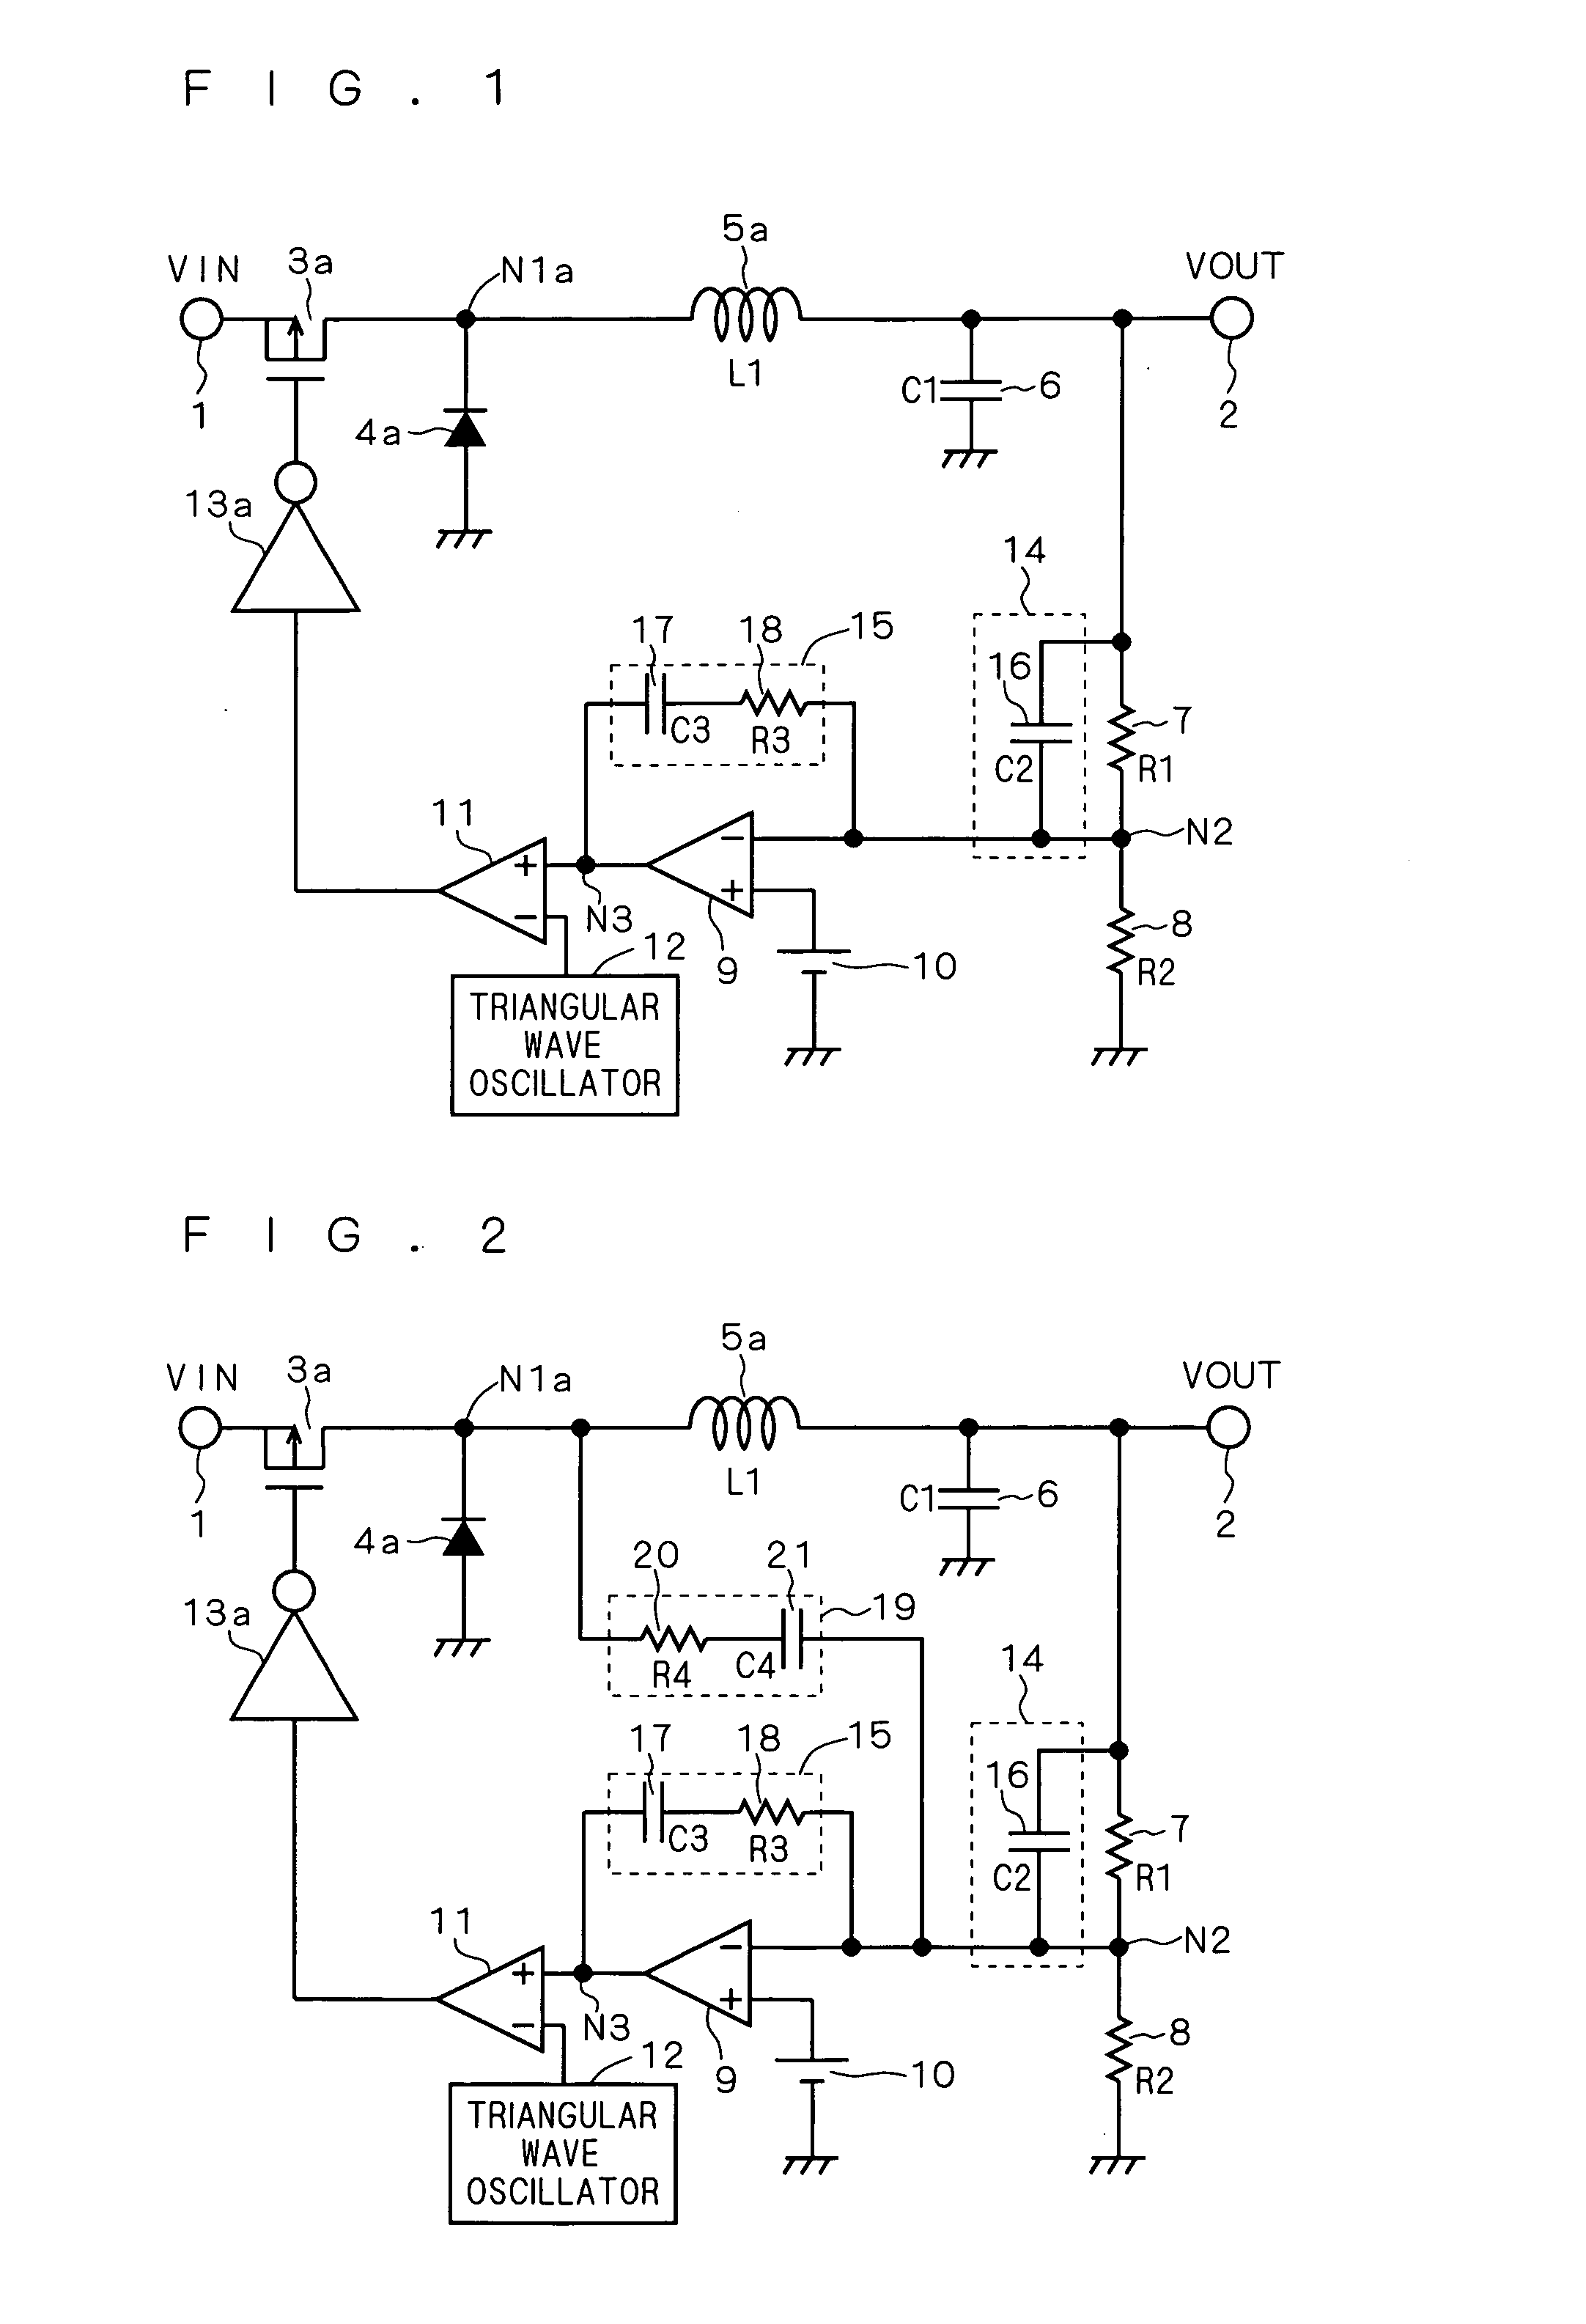 Semiconductor device provided with feedback circuit including resistive element and capacitive element